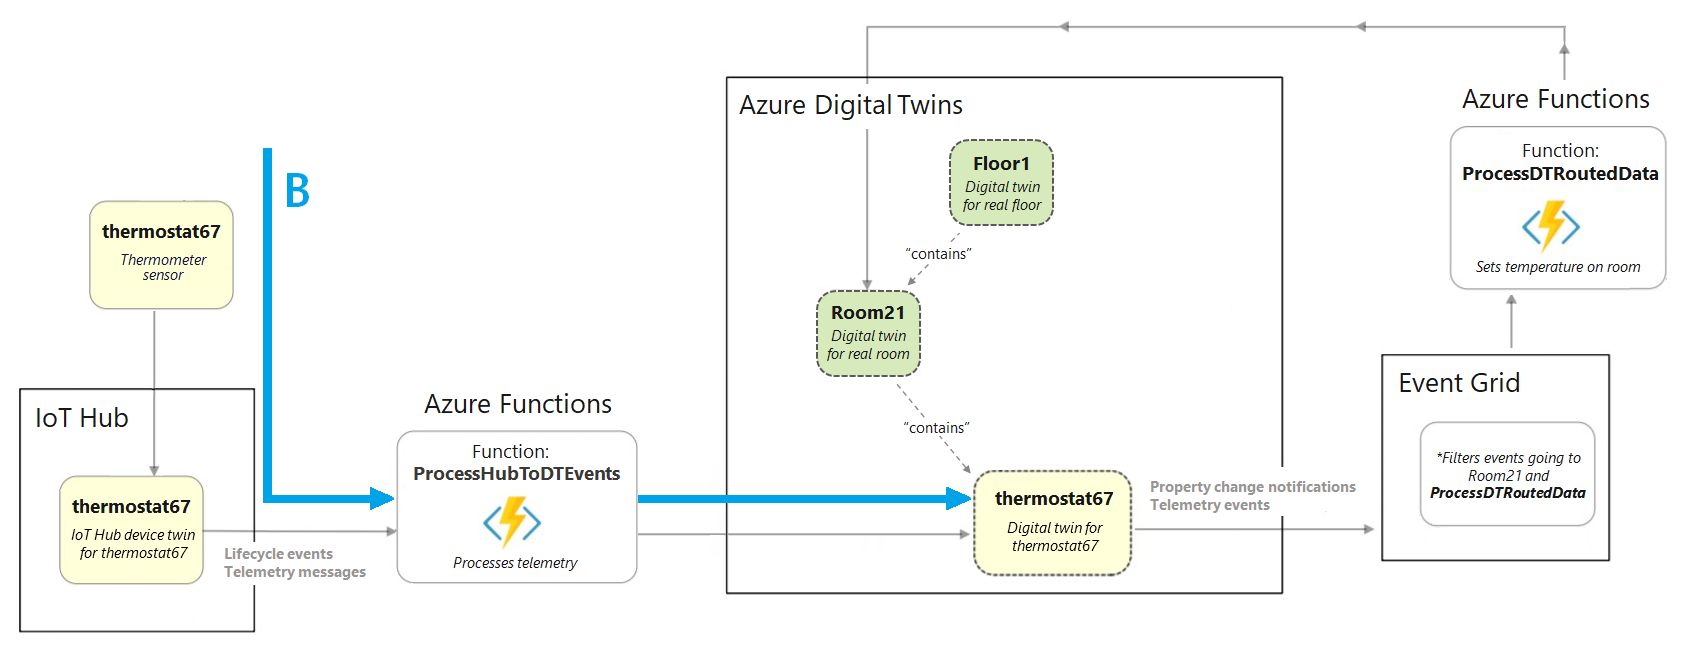 Diagram of an excerpt from the full building scenario diagram highlighting the section that shows elements before Azure Digital Twins.